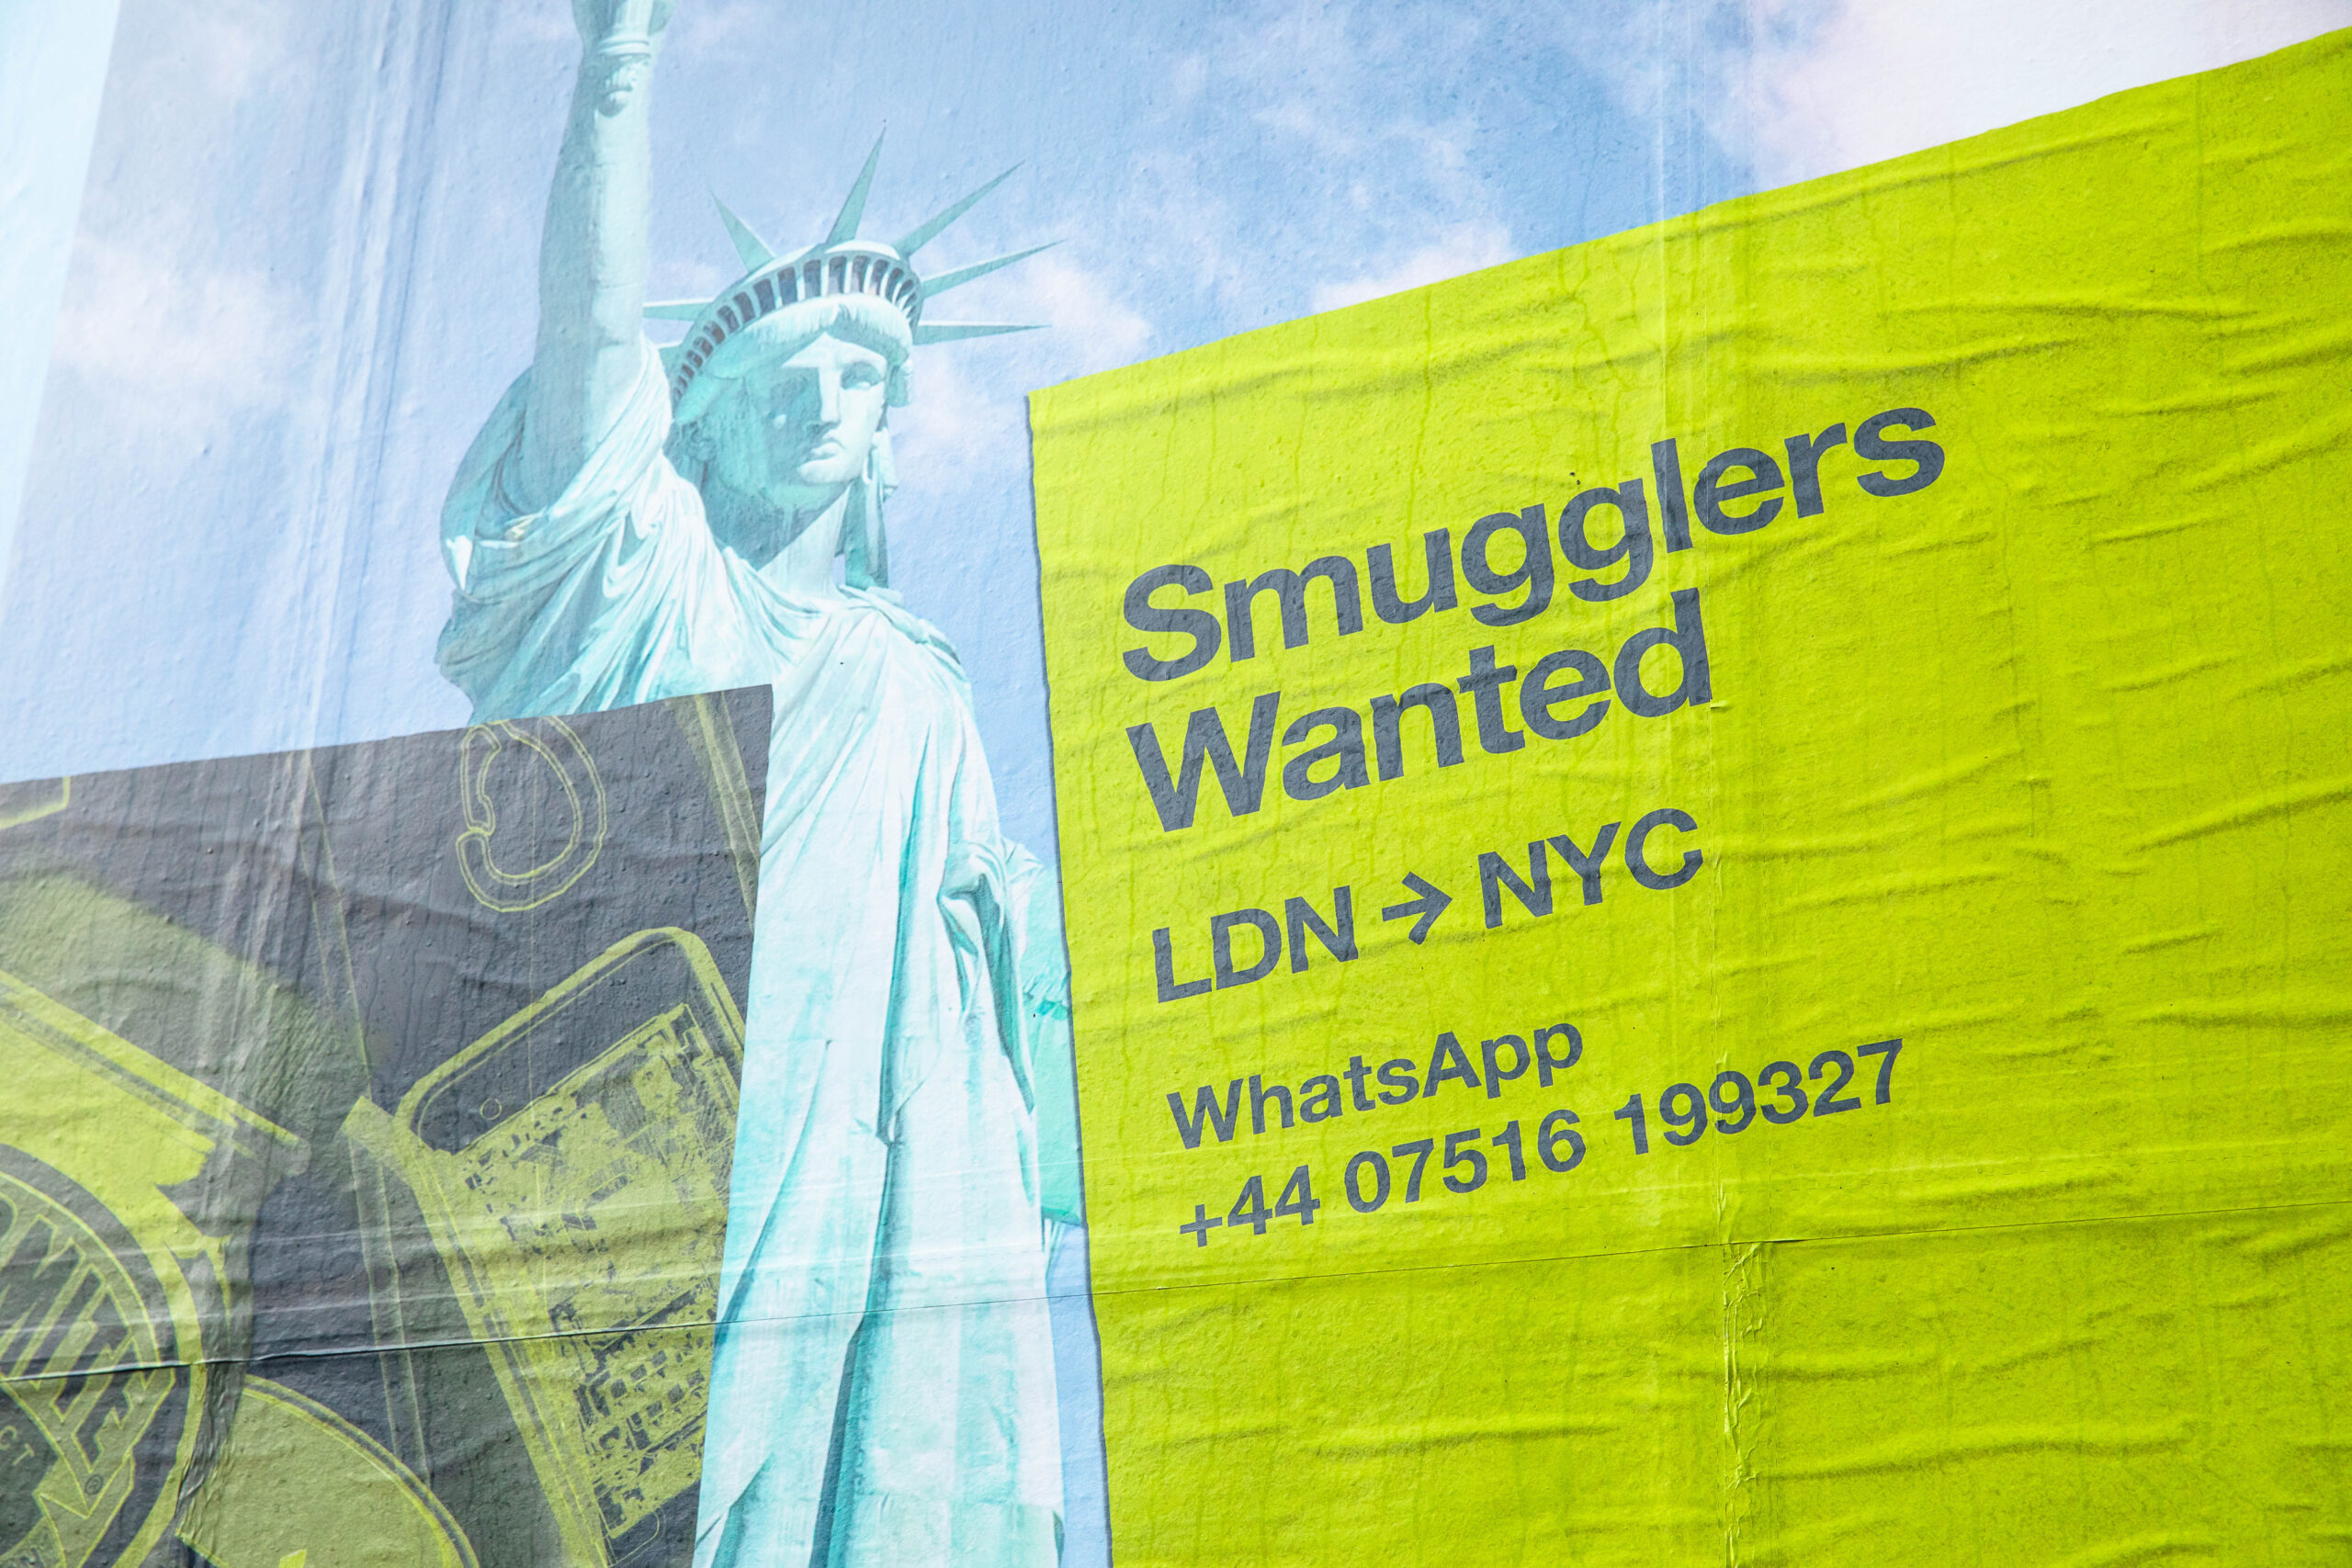 Smugglers campaign “wanted” sign pasted on NYC wall